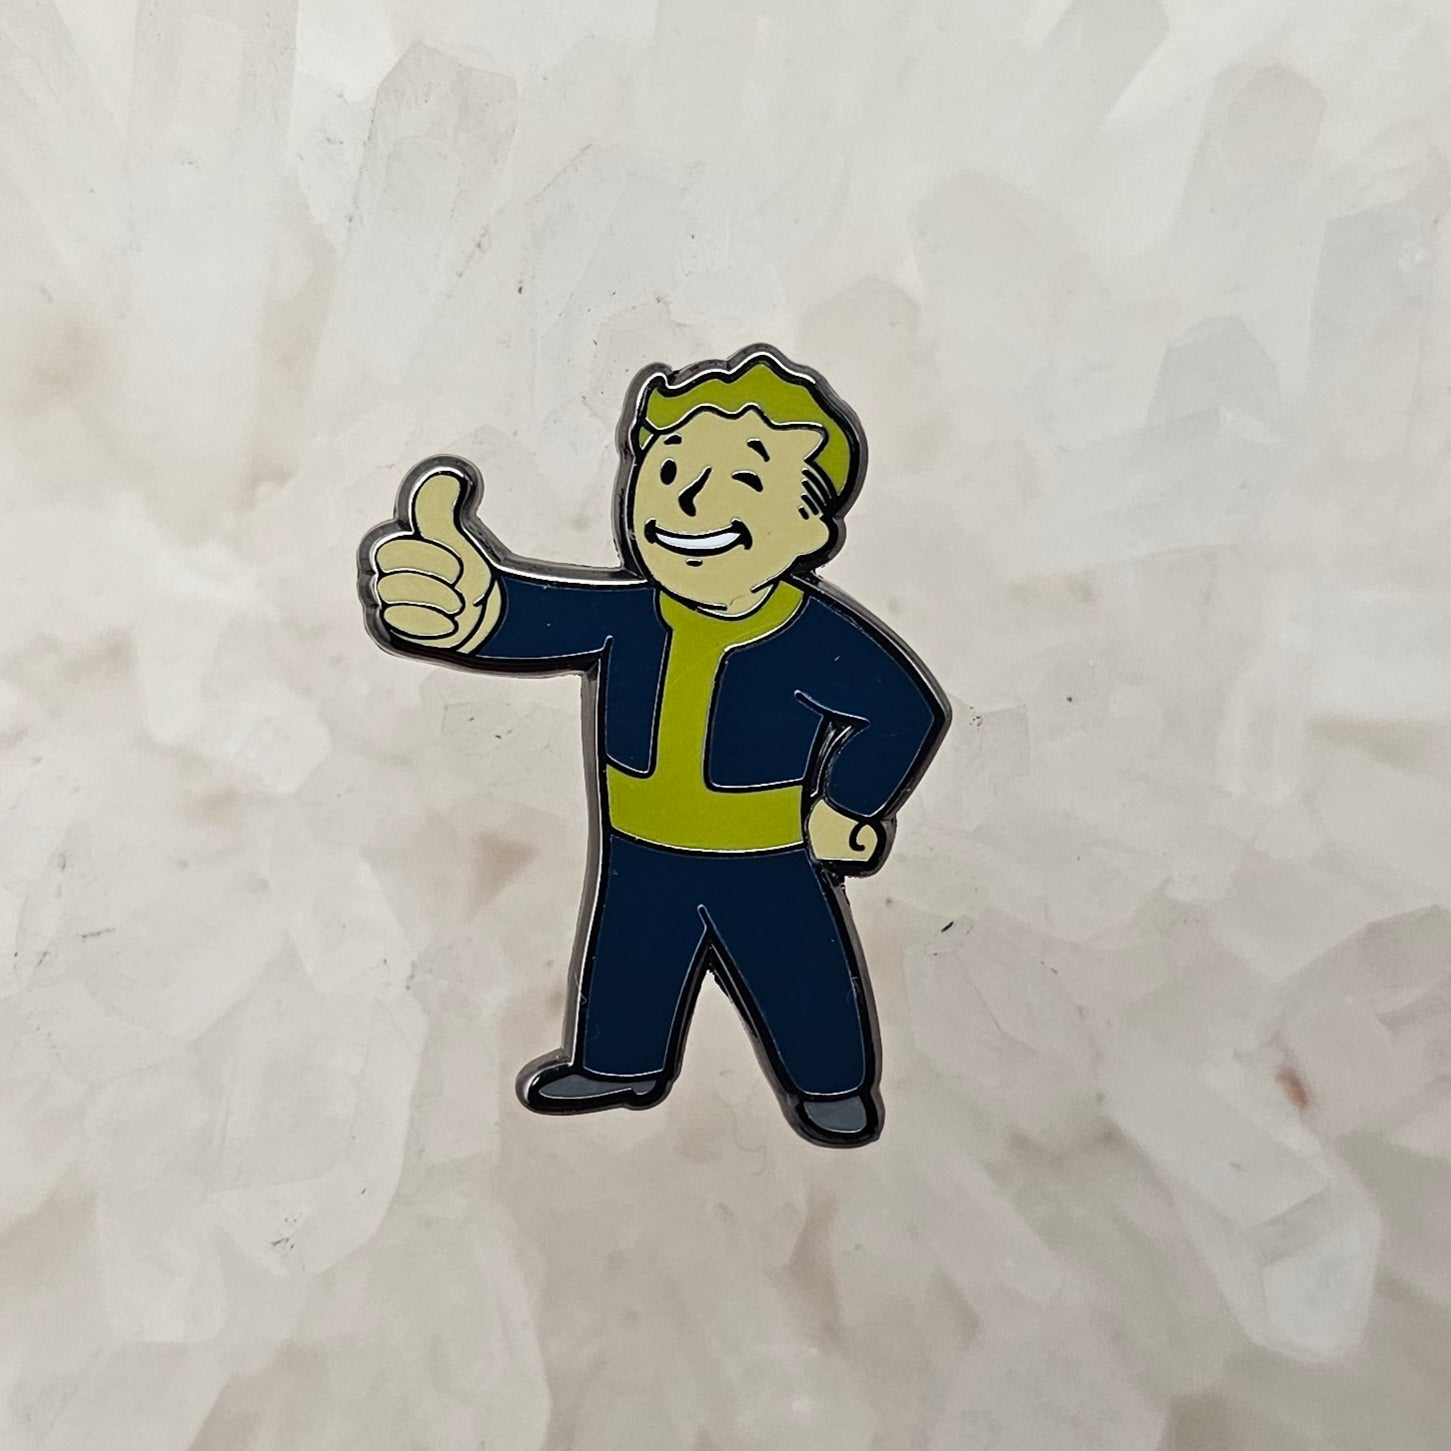 Vault Boy Fallout Nuclear Apocalypse Video Game Enamel Pins Hat Pins Lapel Pin Brooch Badge Festival Pin